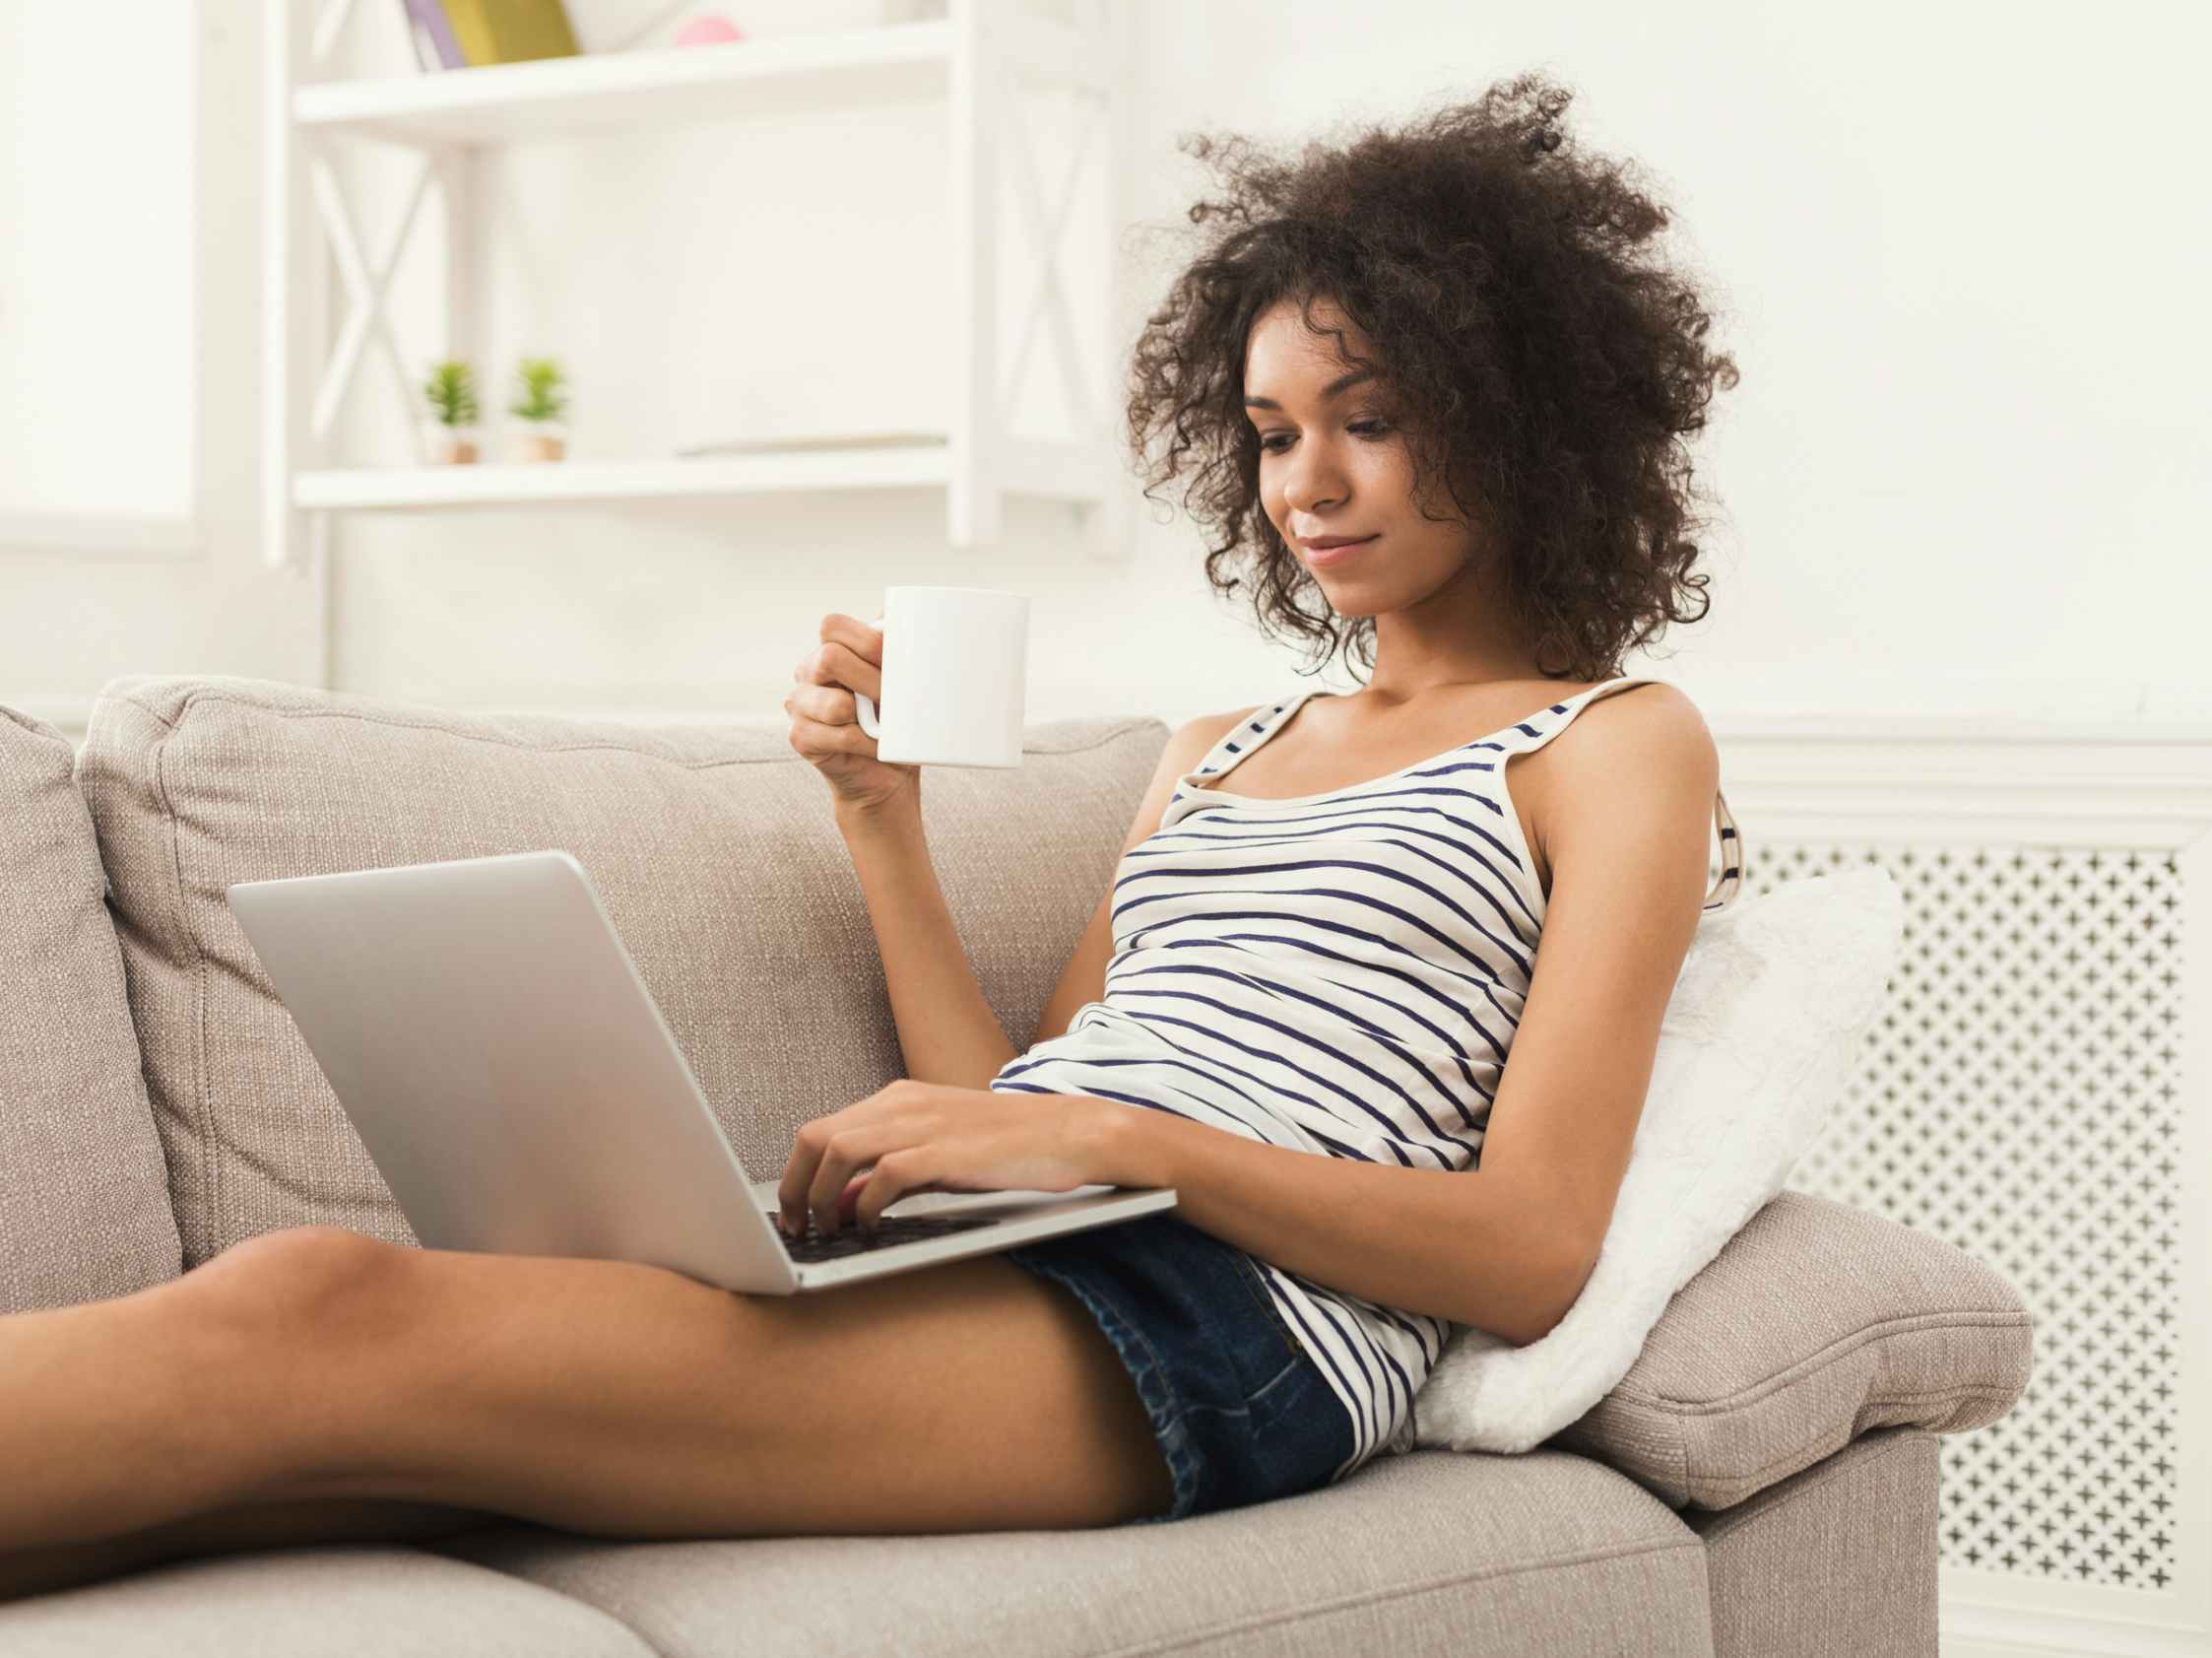 A woman sitting on a couch, using a laptop.